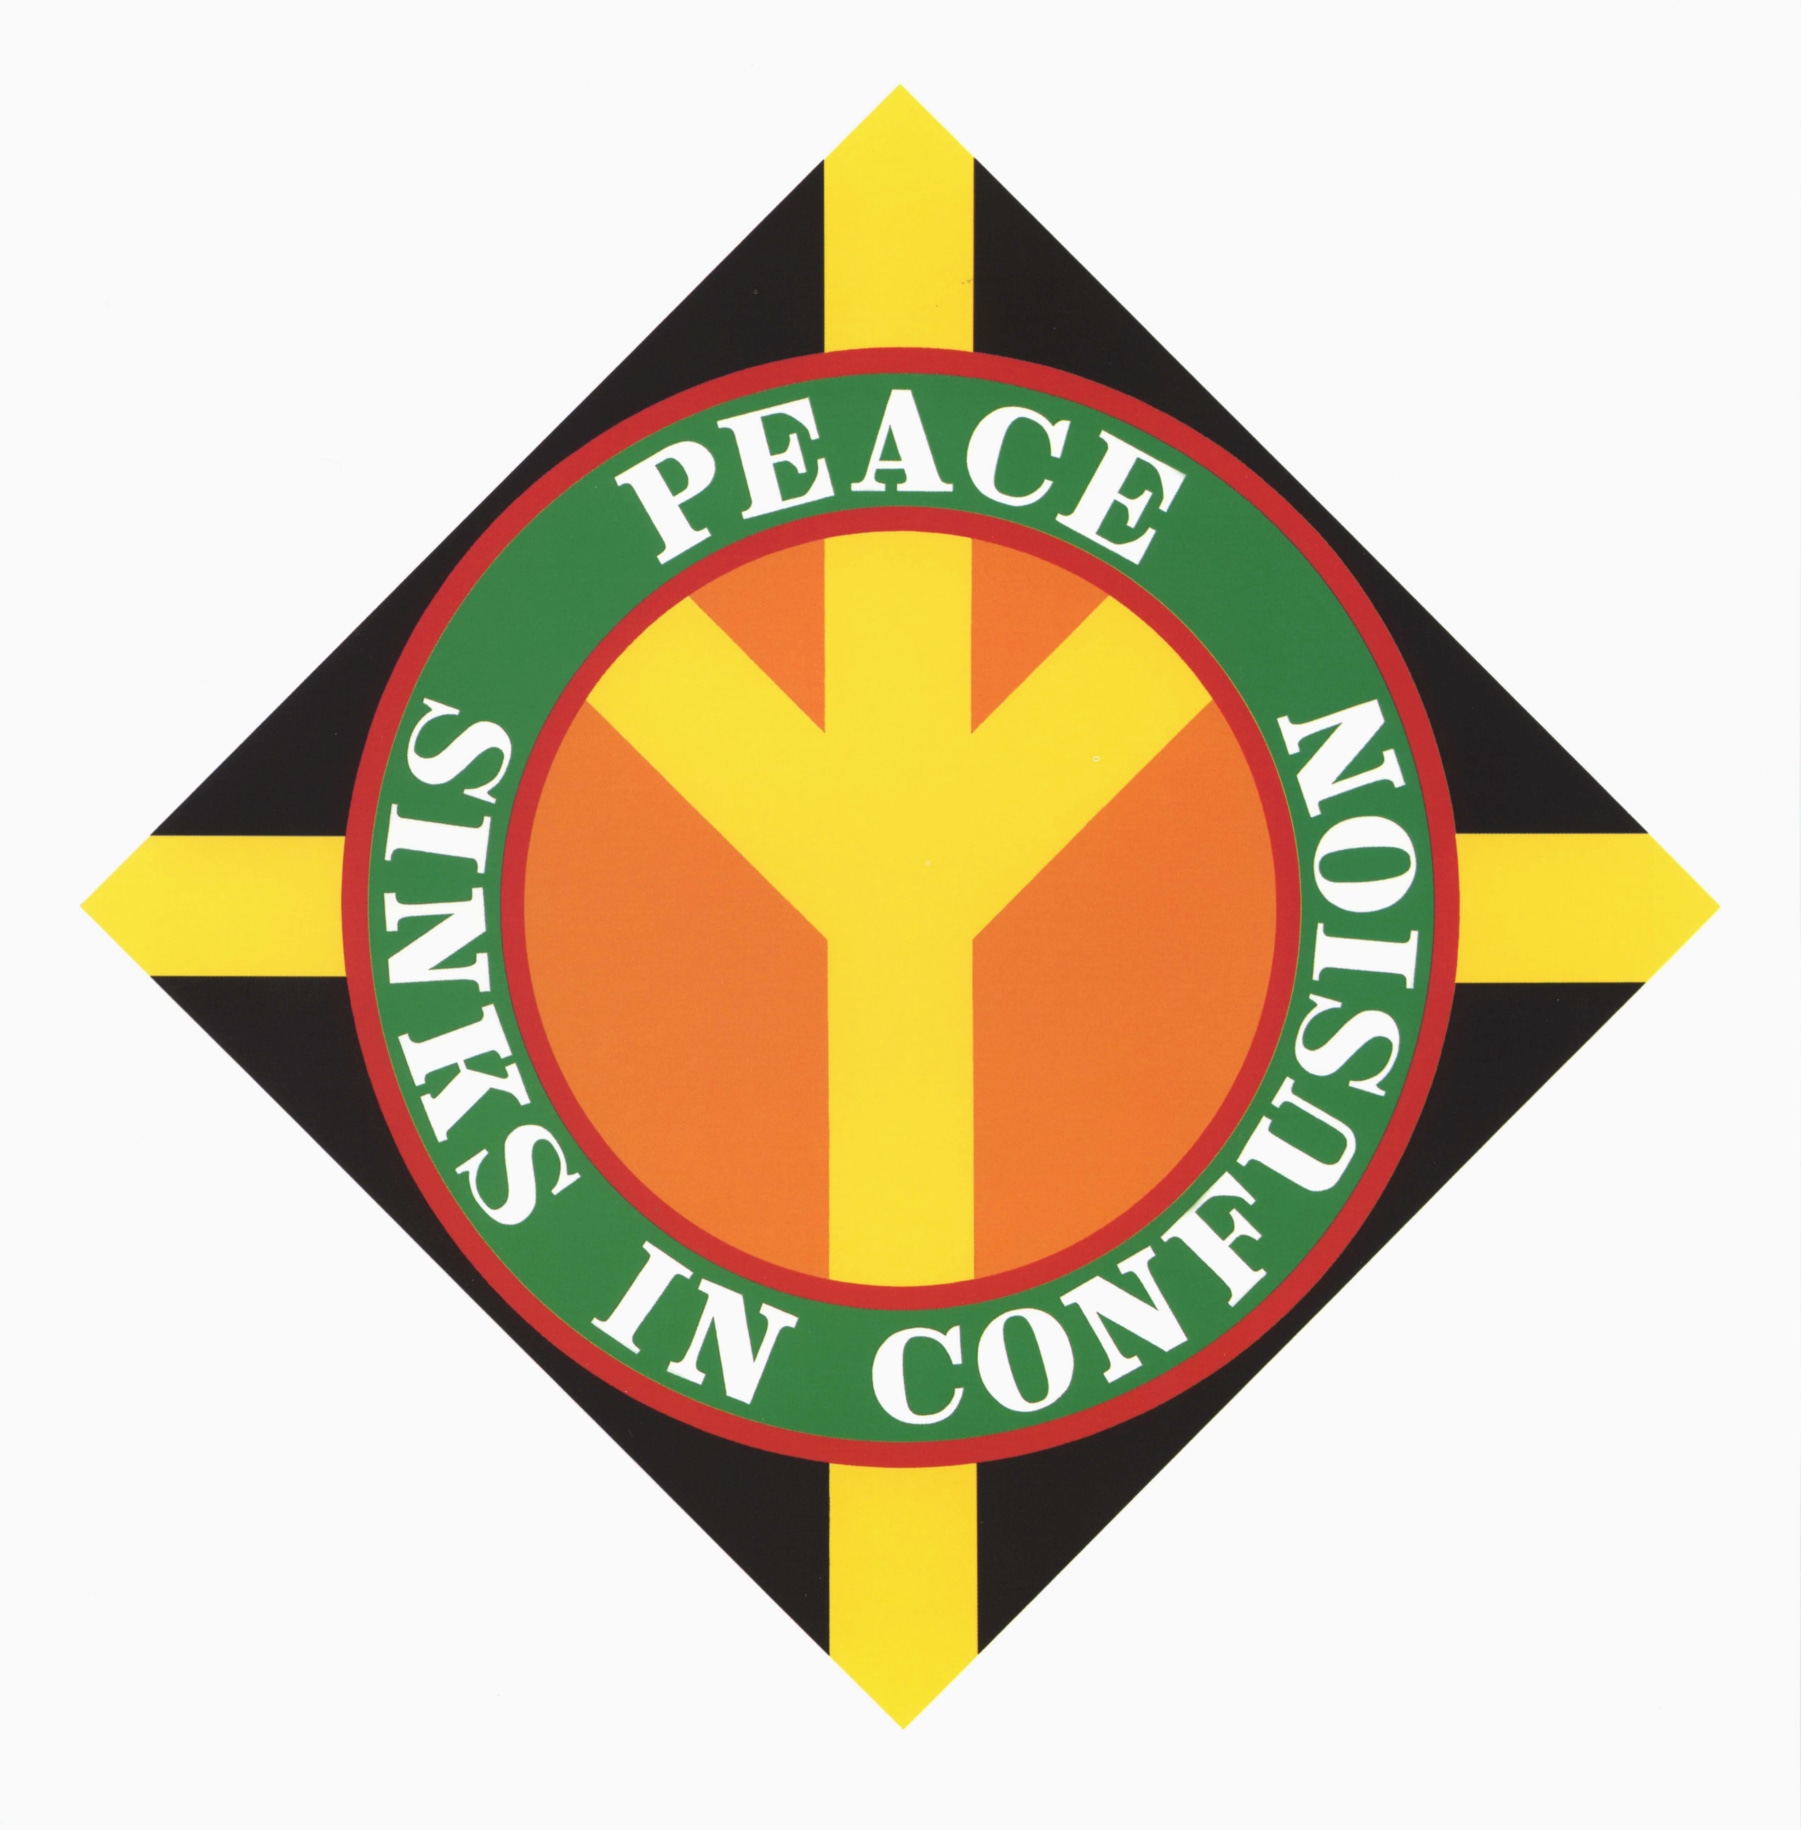 A 67 1/2 by 67 1/2 inch diamond shaped black painting with an upside down yellow peace sign in an orange circle. The ring around the circle is green with red outlines. In it the work's title, &quot;Peace Sinks in Confusion,&quot; is painted in white letters. &quot;Peace&quot; appears on the top half, and &quot;Sinks in Confusion&quot; appears on the bottom half. Yellow rectangular bands of paint go from the outer edge of the circle to each corner of the triangle.